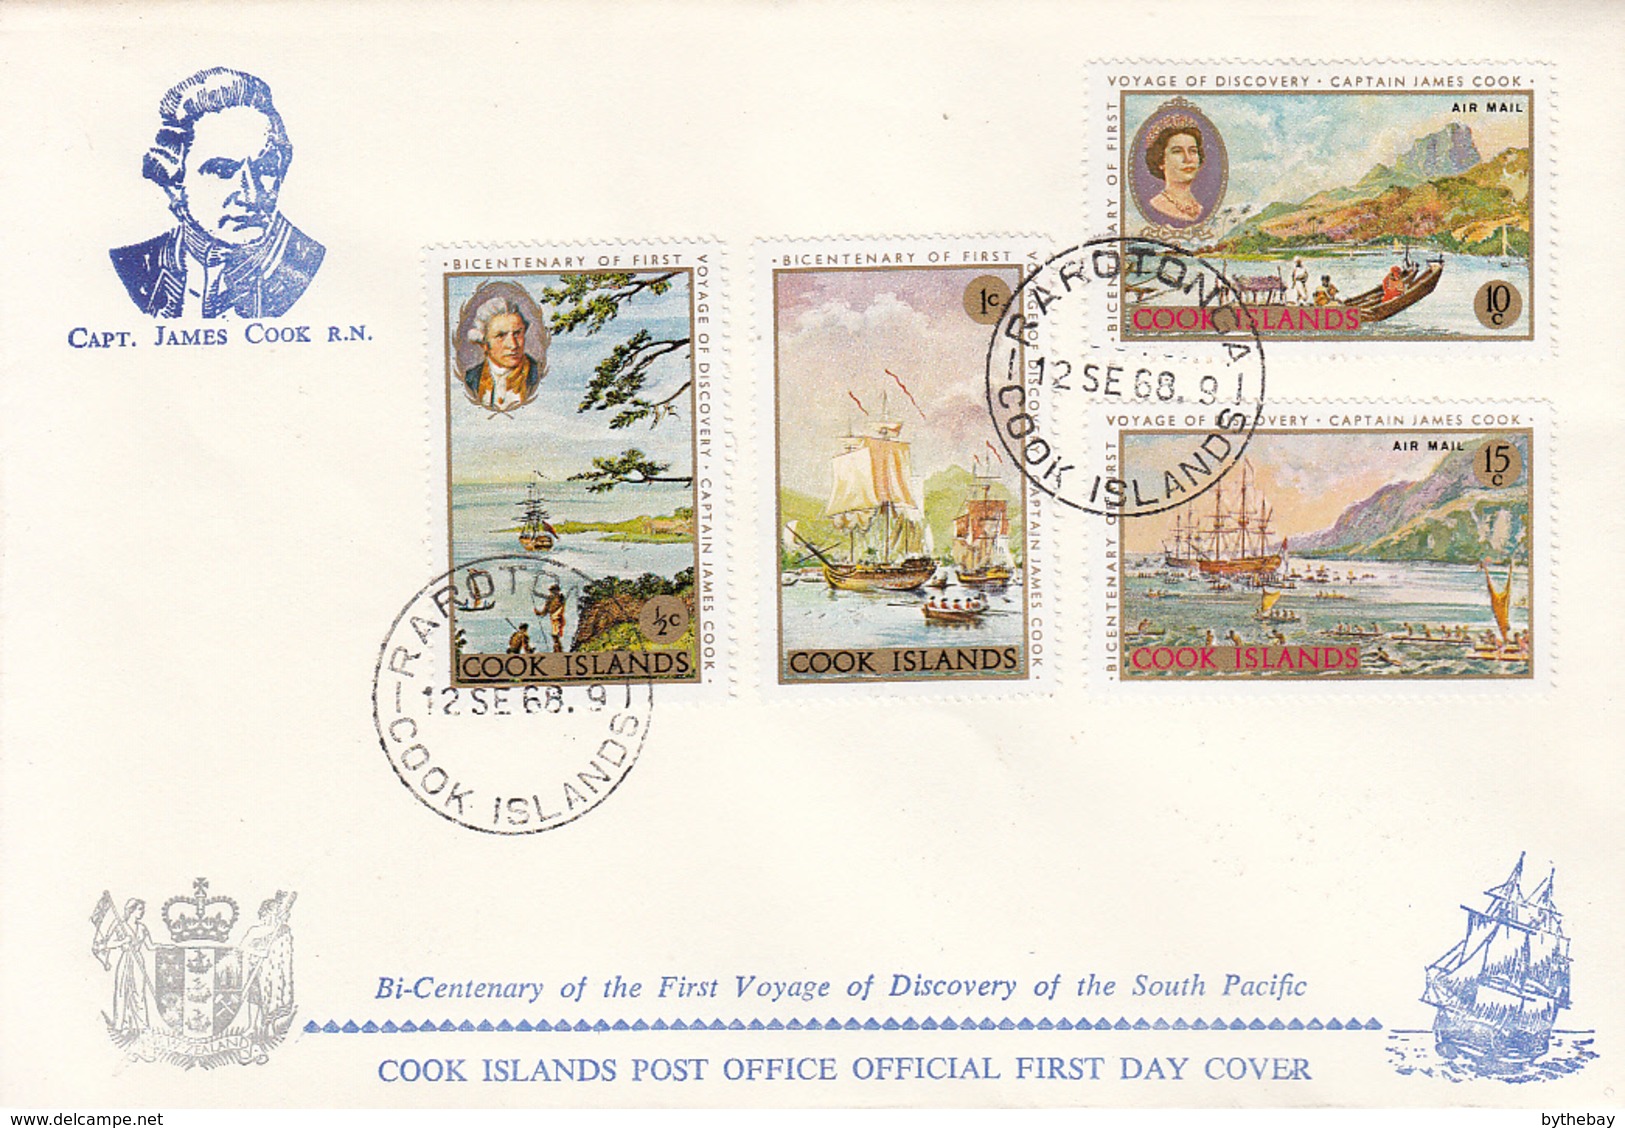 Cook Islands 1968 2 FDCs Sc #233-#236, #C12-#C15 Captain Cook's First Voyage, 200th Anniversary - Cook